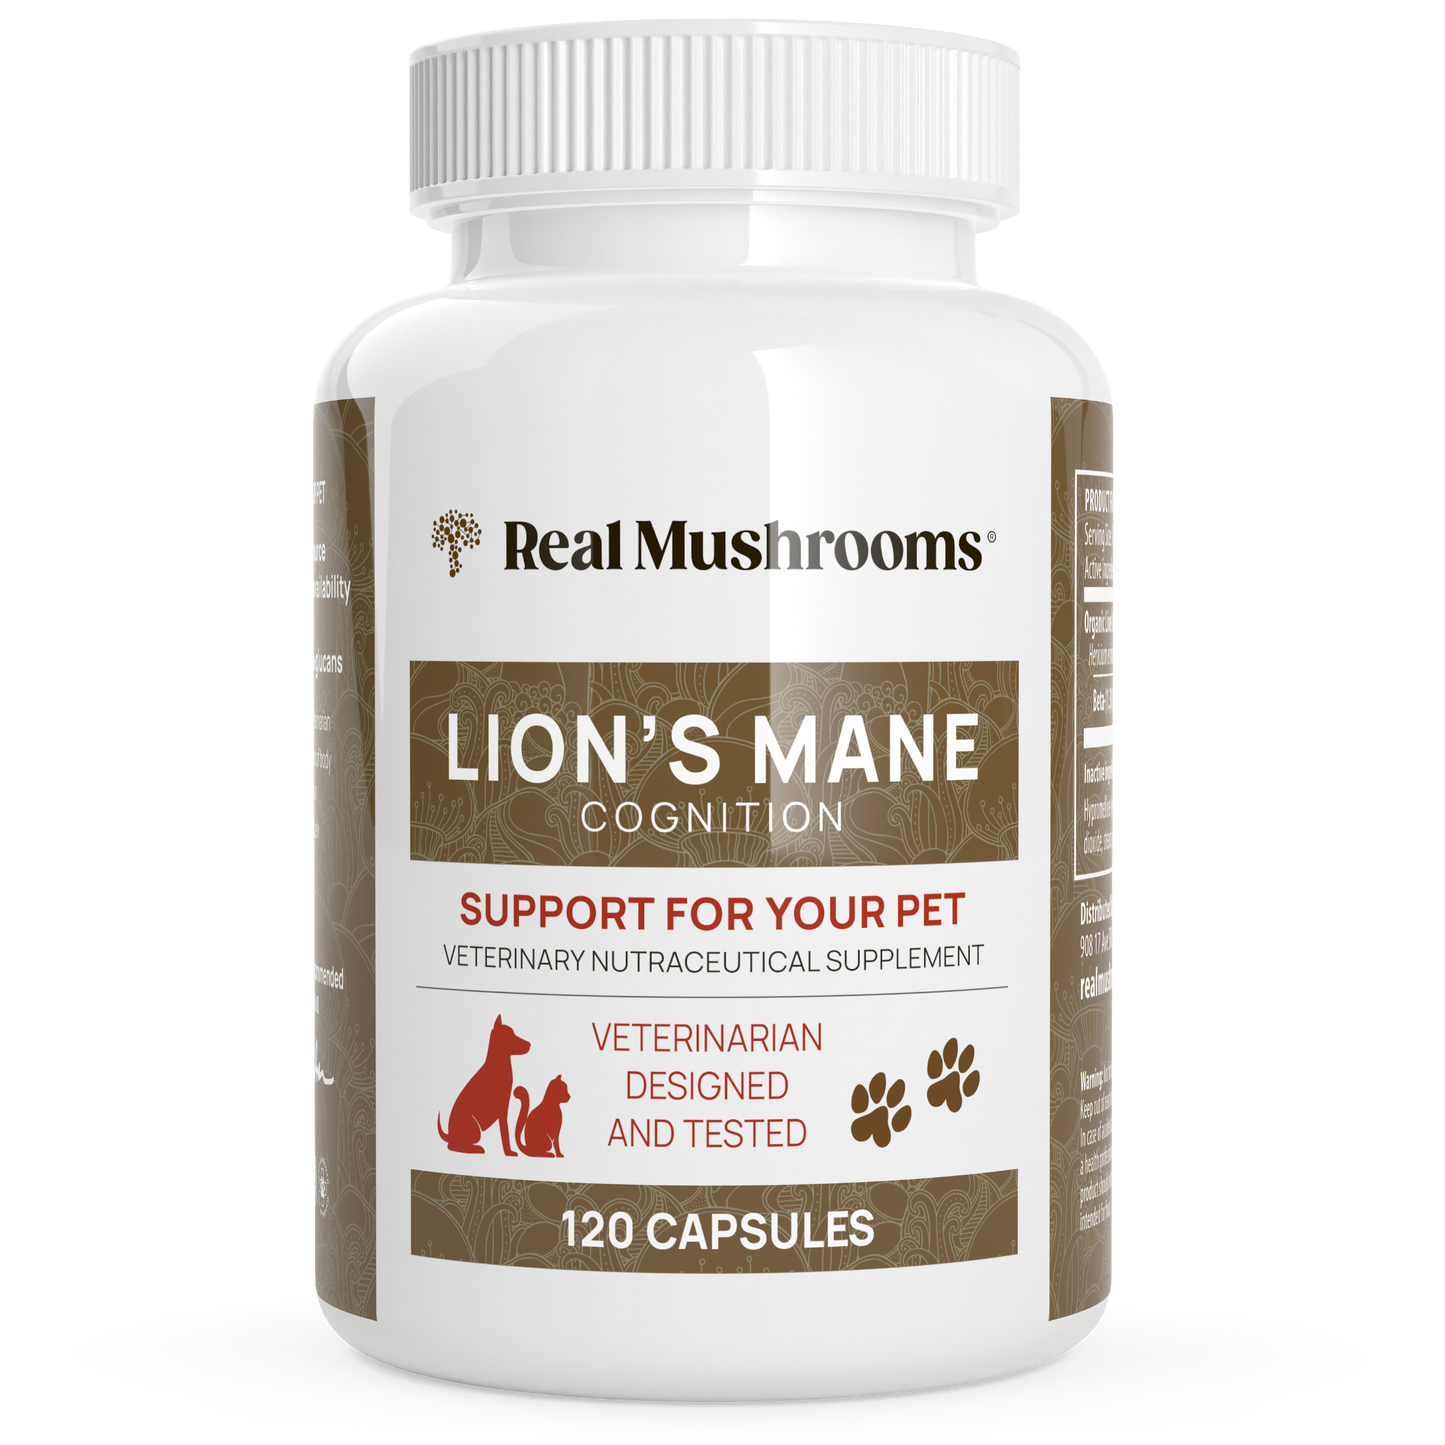 Real Mushrooms Organic Lions Mane Extract Capsules for Pets.